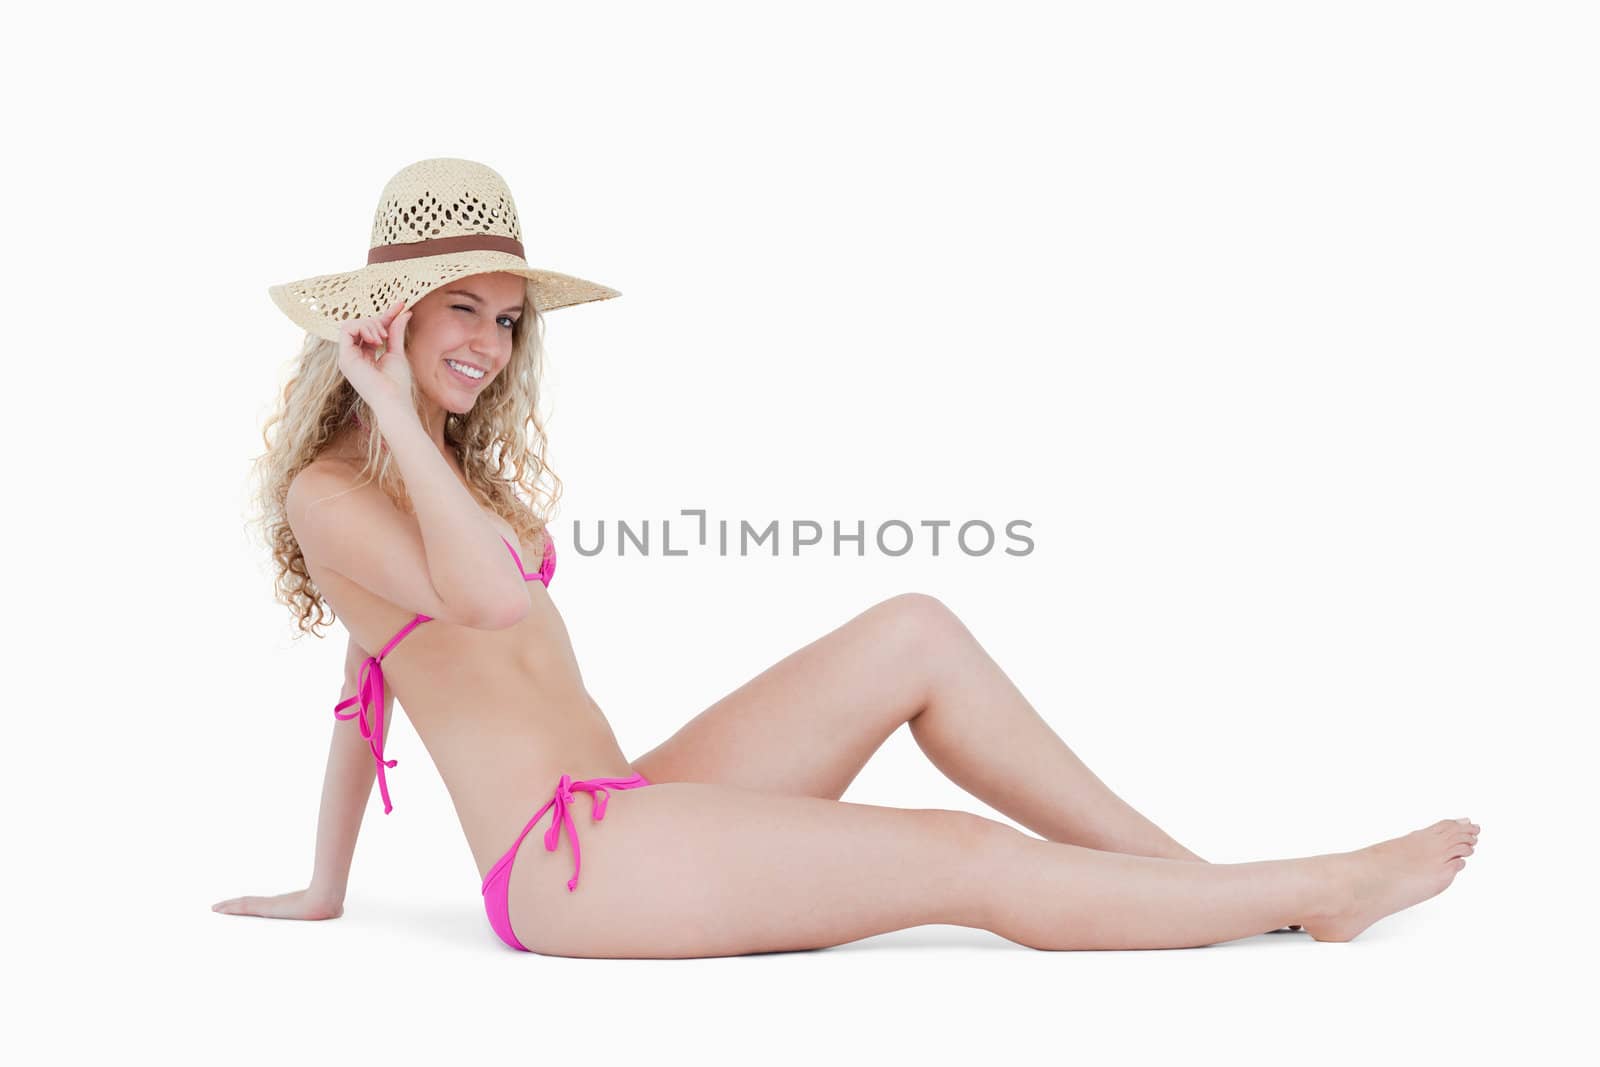 Young woman sitting down while holding her hat brim against a white background